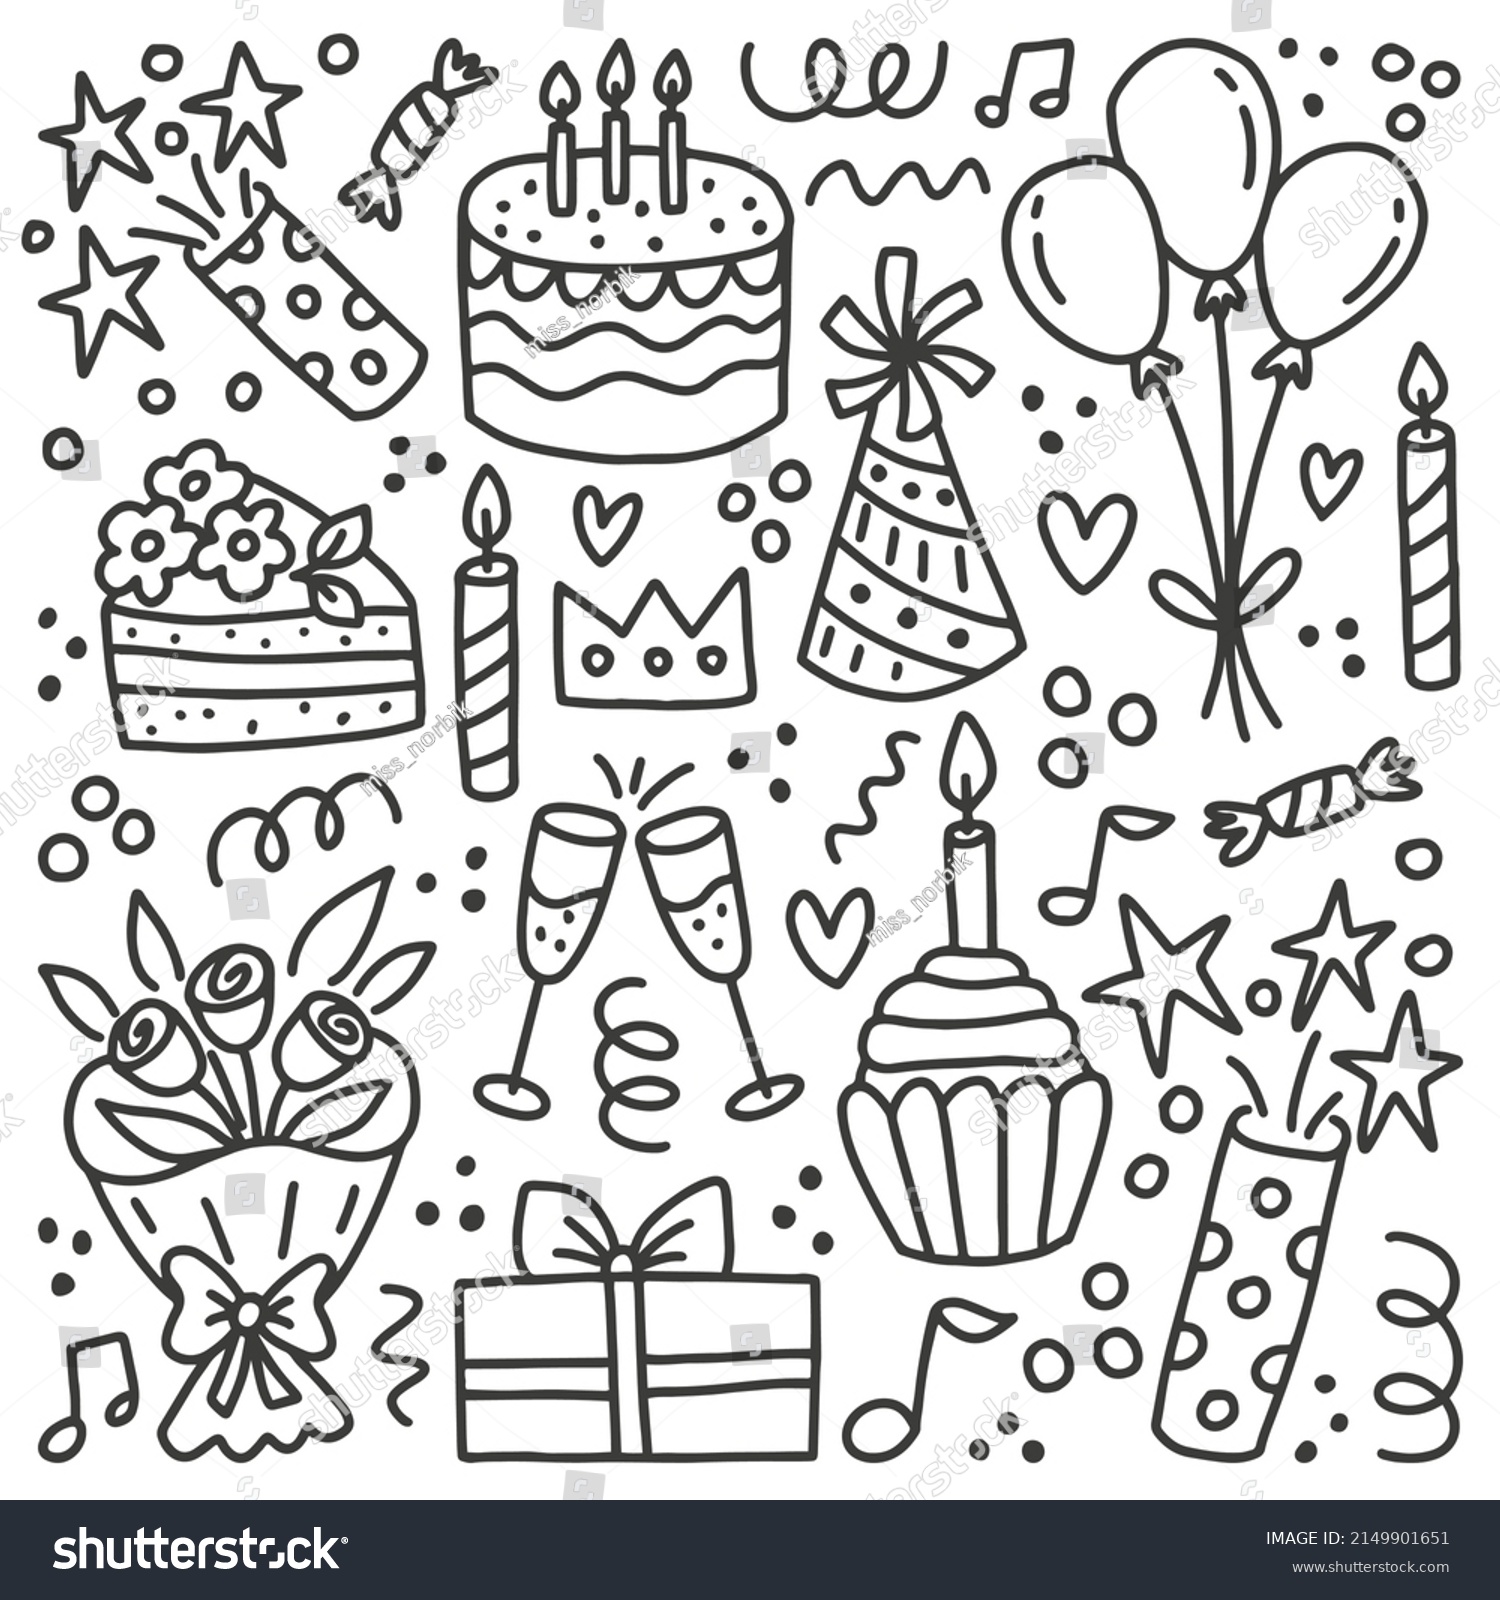 Vector Happy Birthday Doodles Isolated On Stock Vector (Royalty Free ...